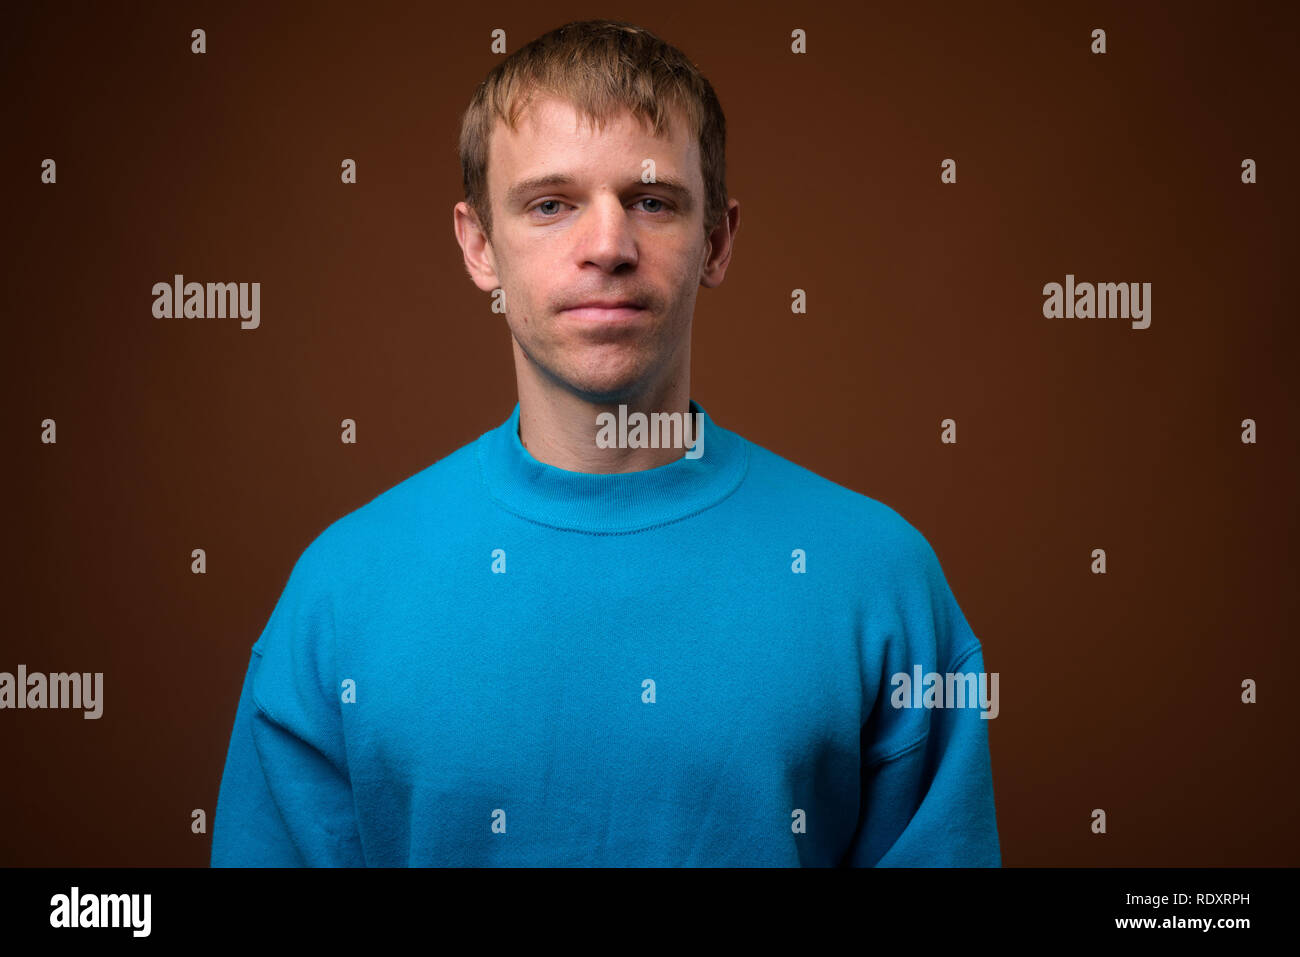 Man wearing blue sweater against brown background Stock Photo